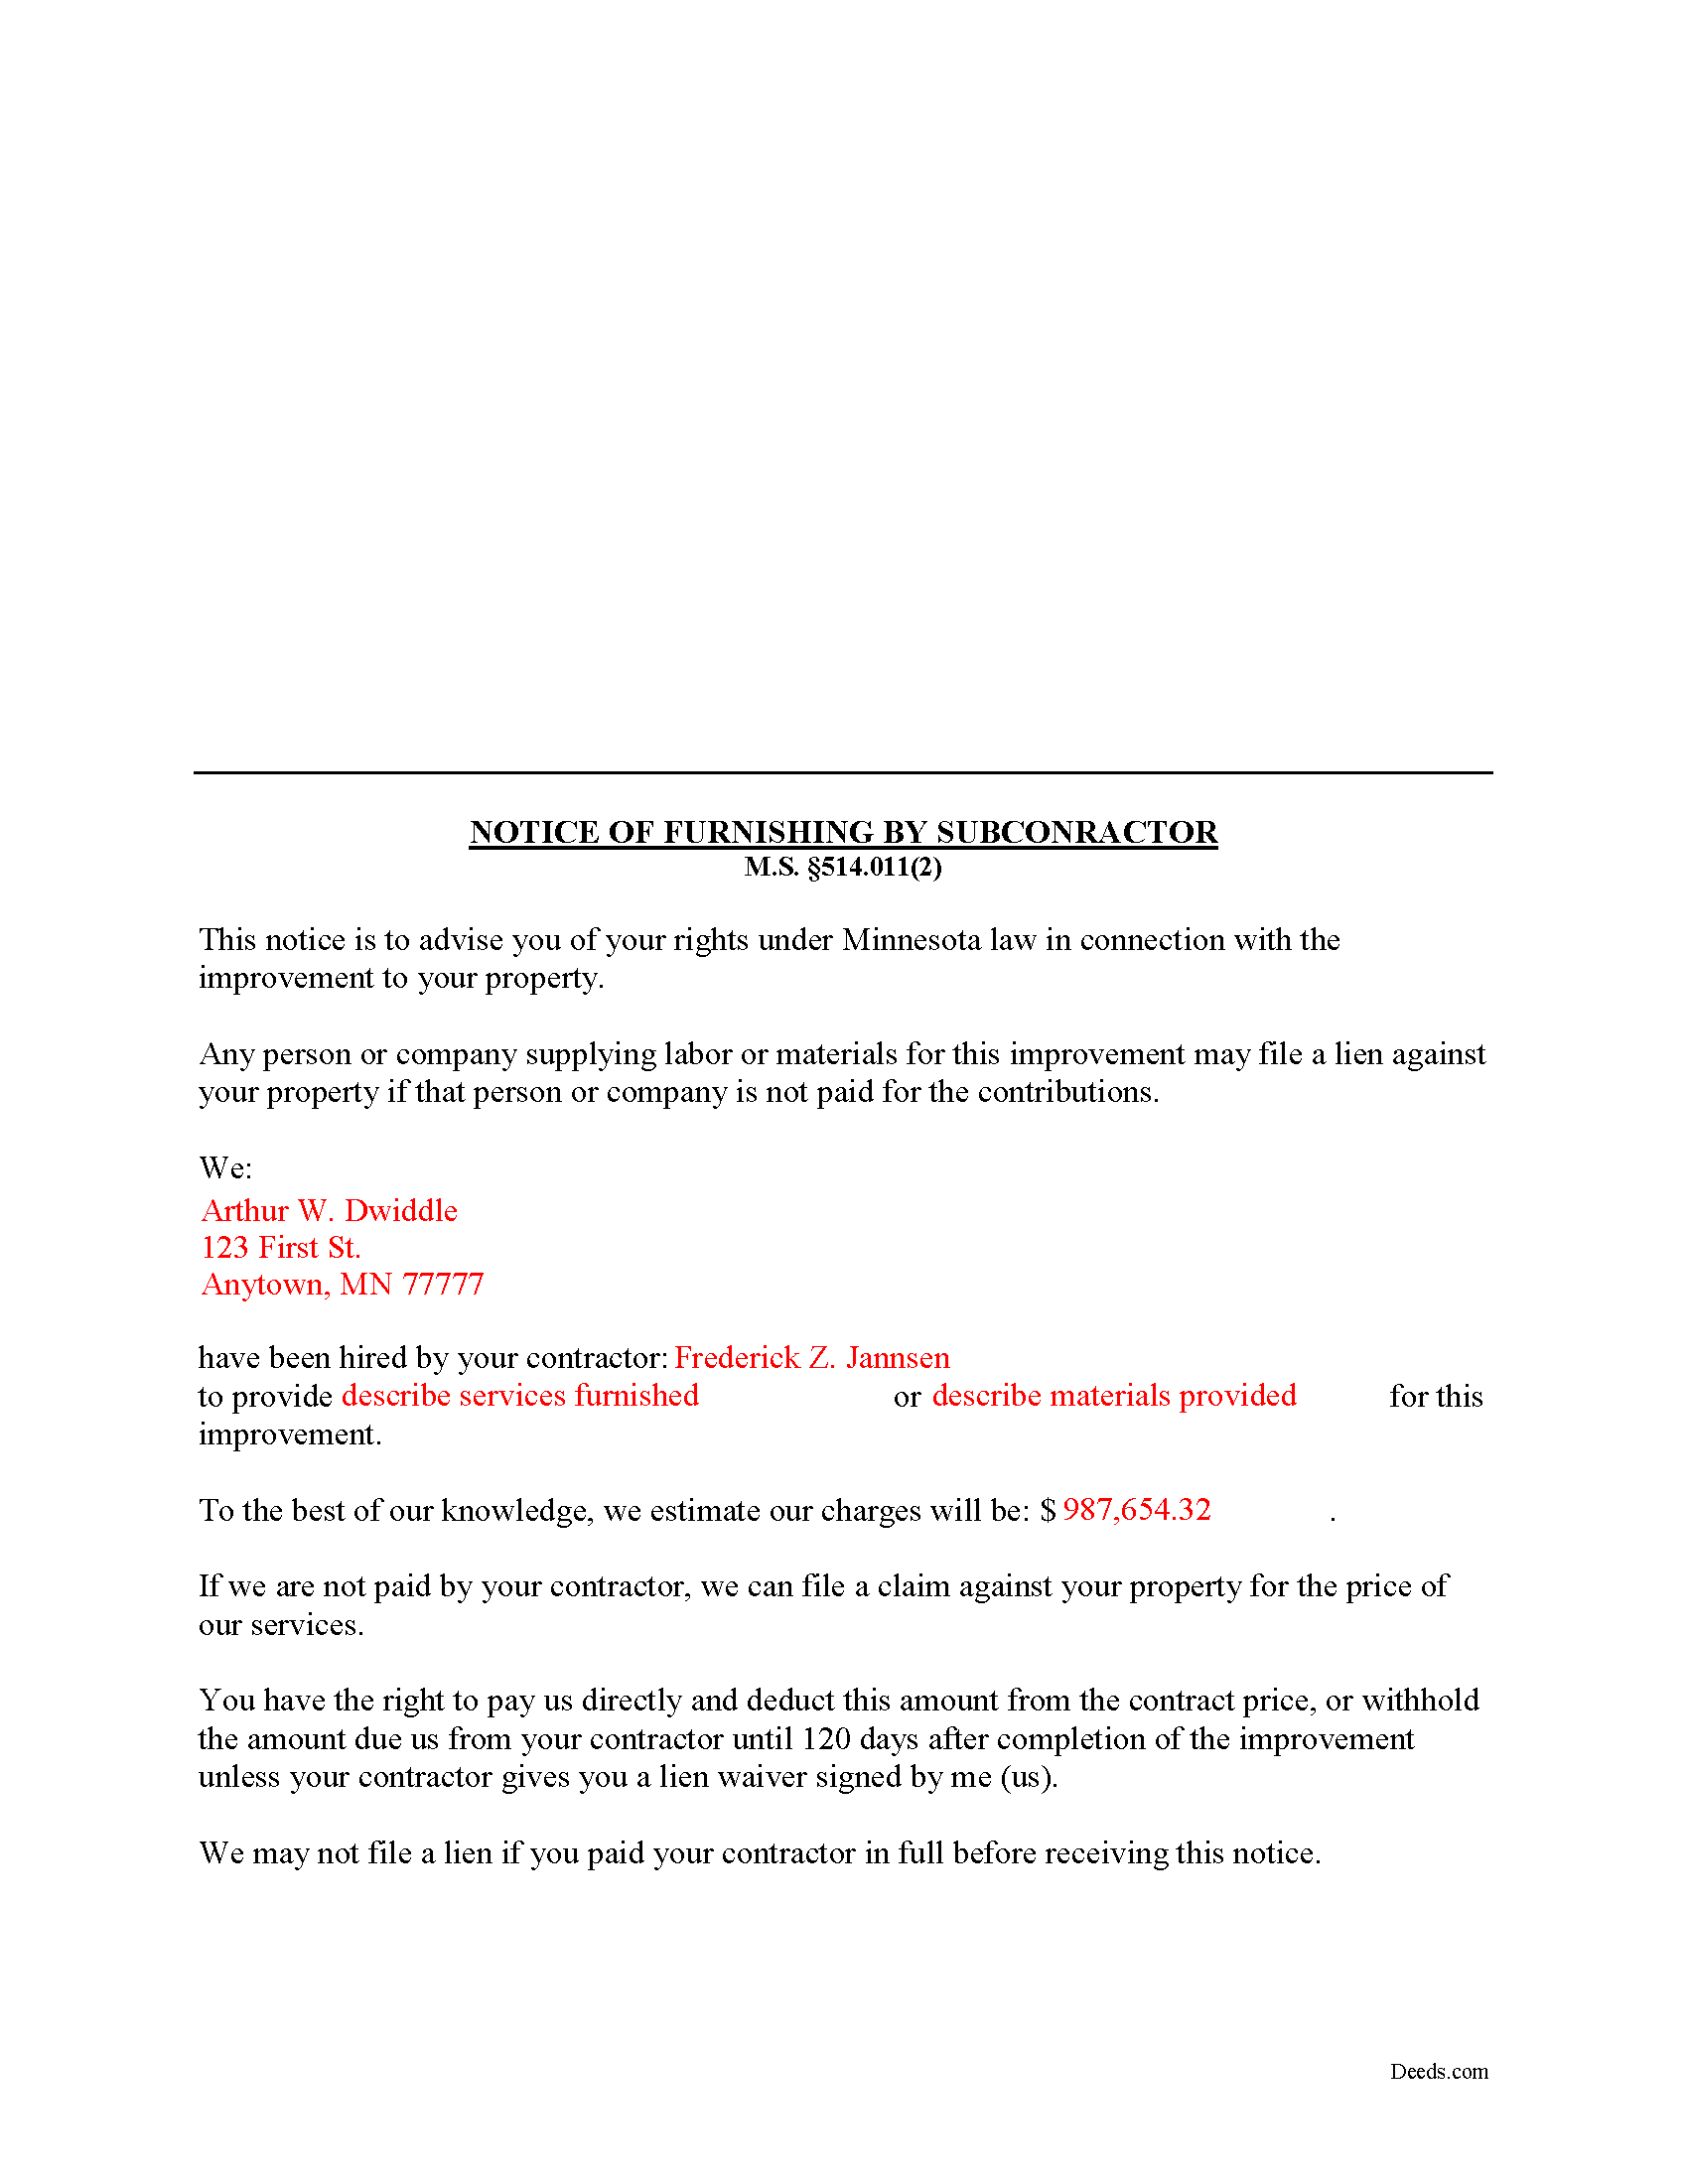 Completed Example of the Subcontractor Notice of Furnishing Document